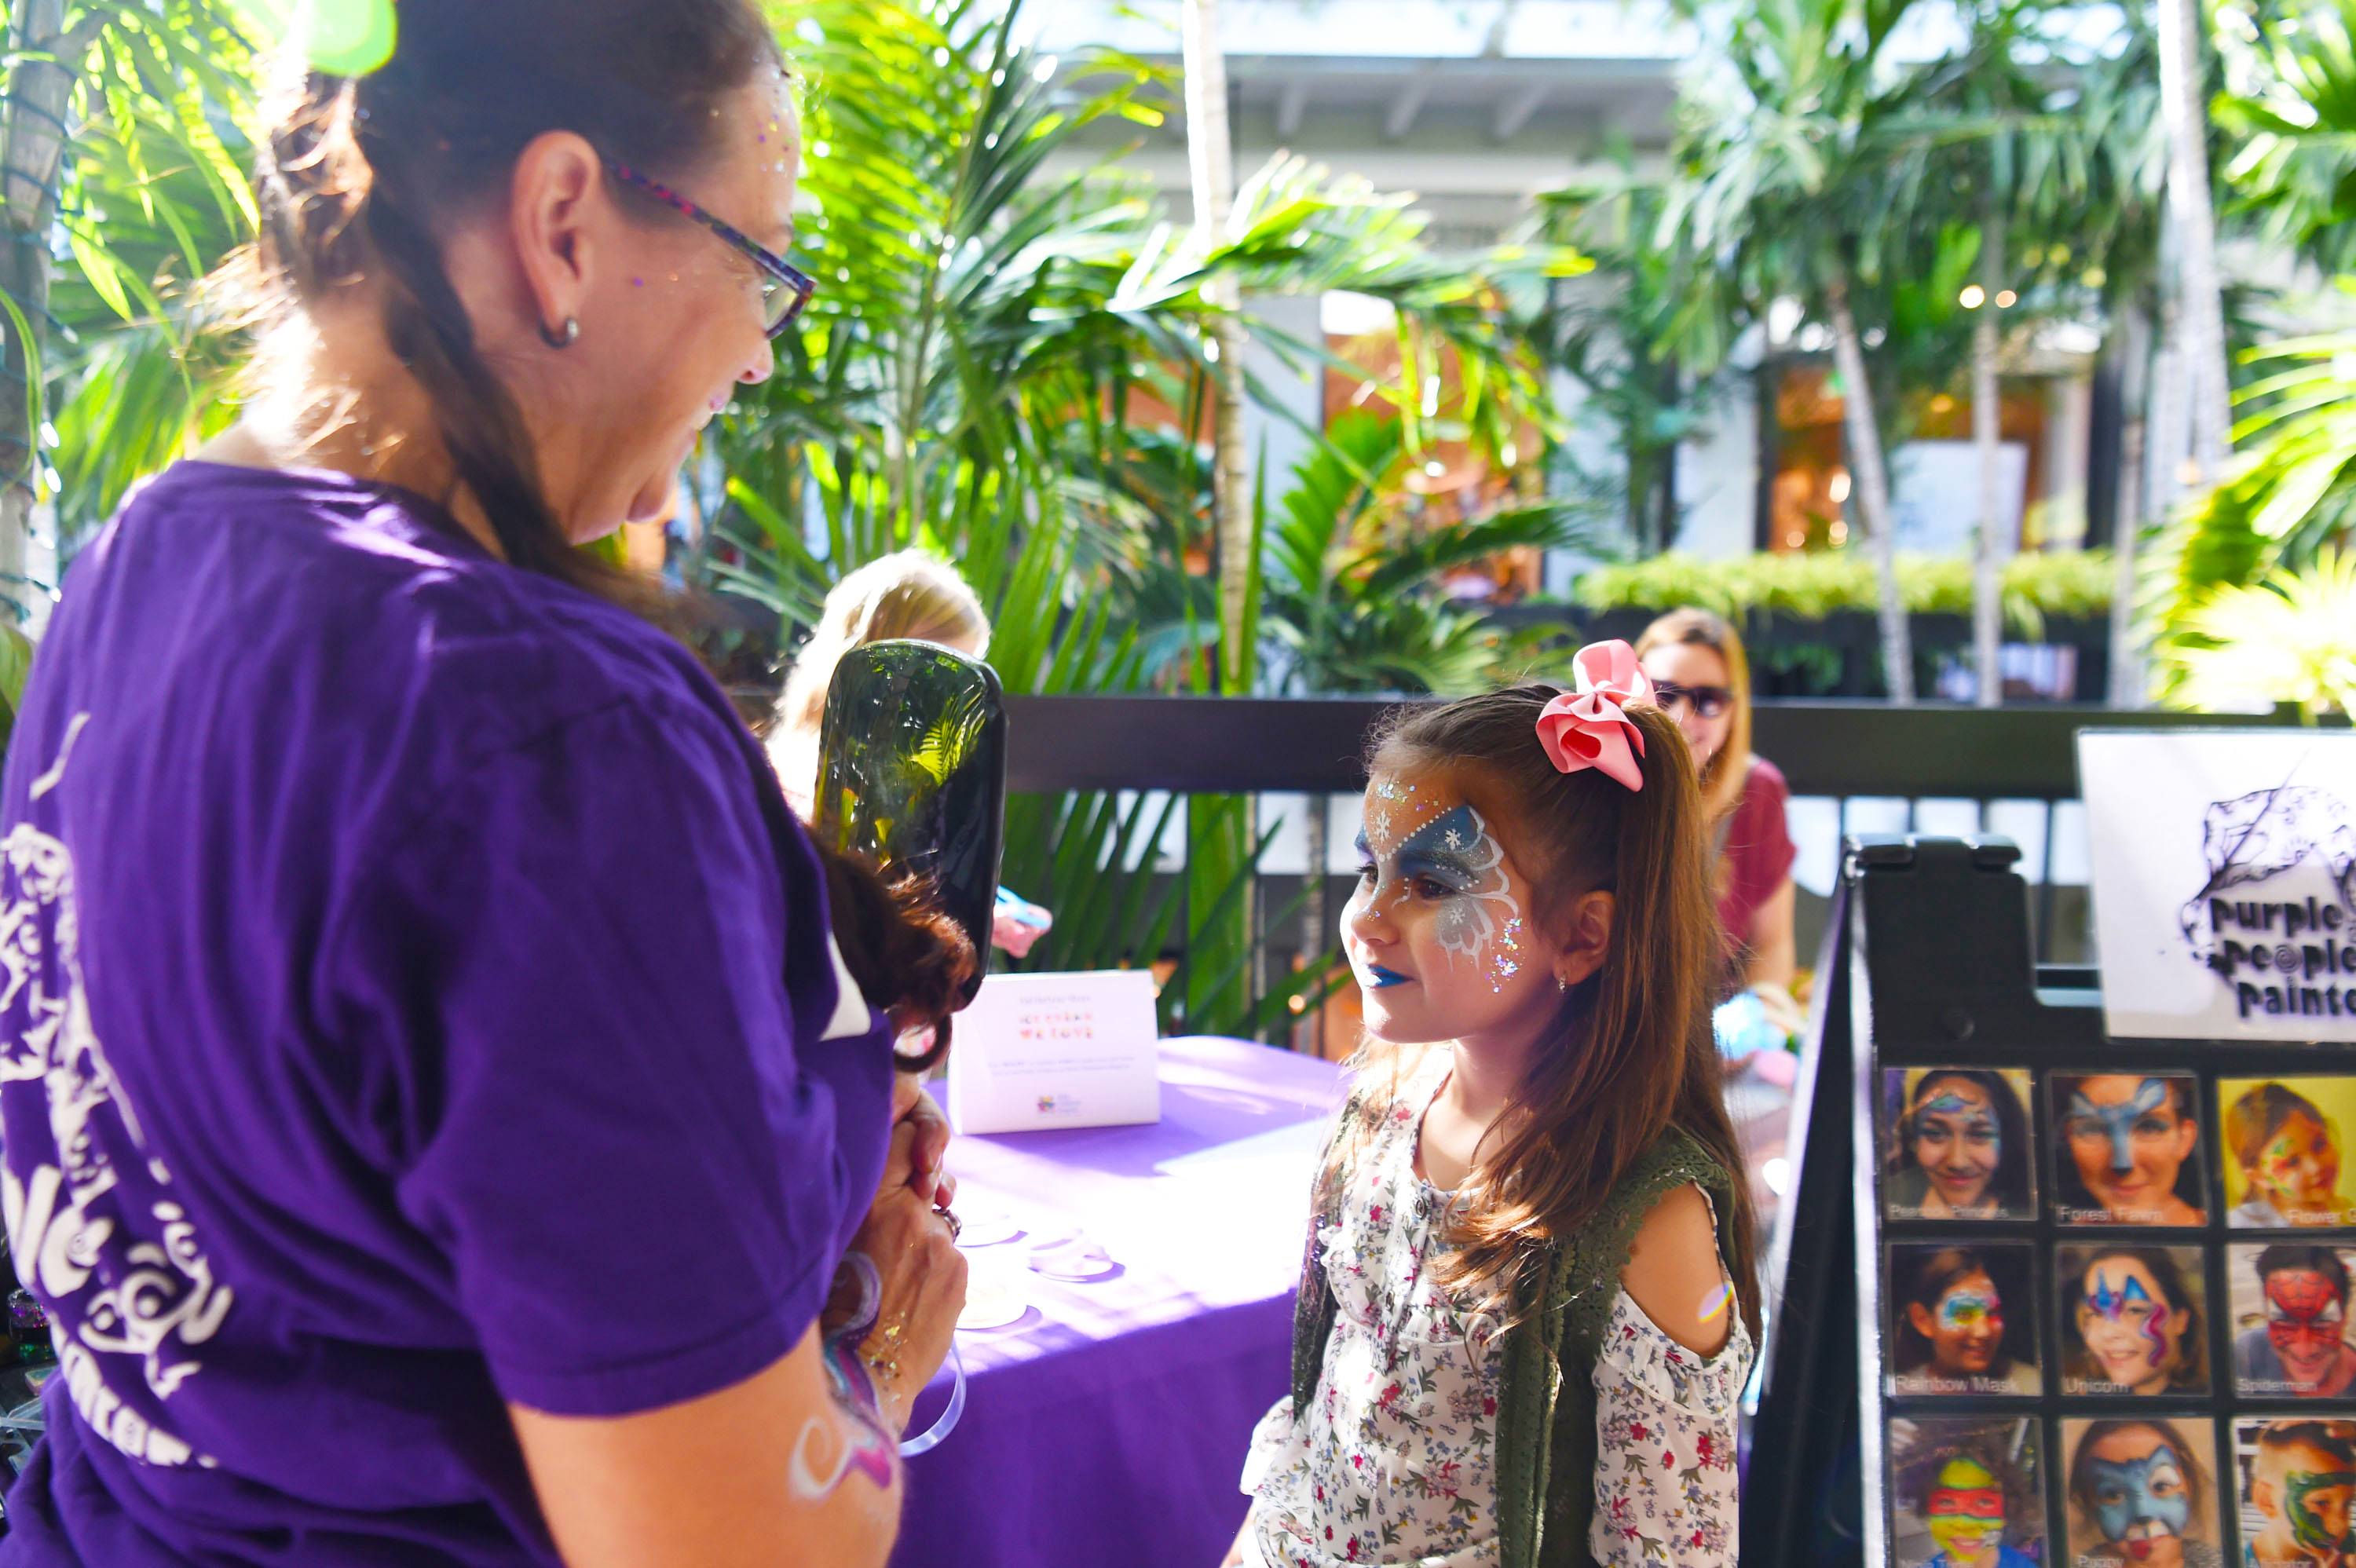 Kids enjoyed getting their faces painted on Level 2 of the Shops